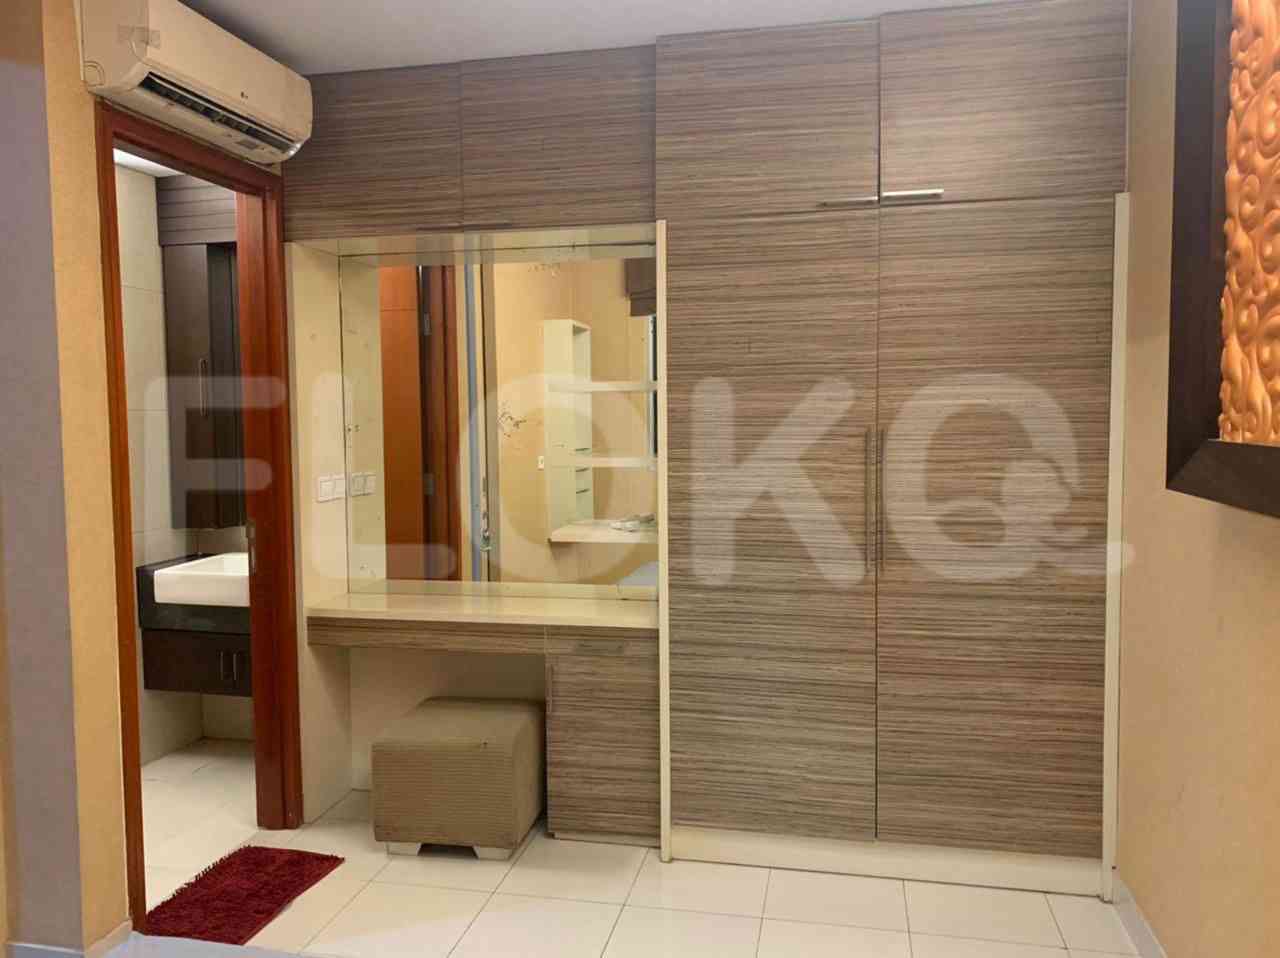 1 Bedroom on 6th Floor for Rent in Kuningan Place Apartment - fkued1 4